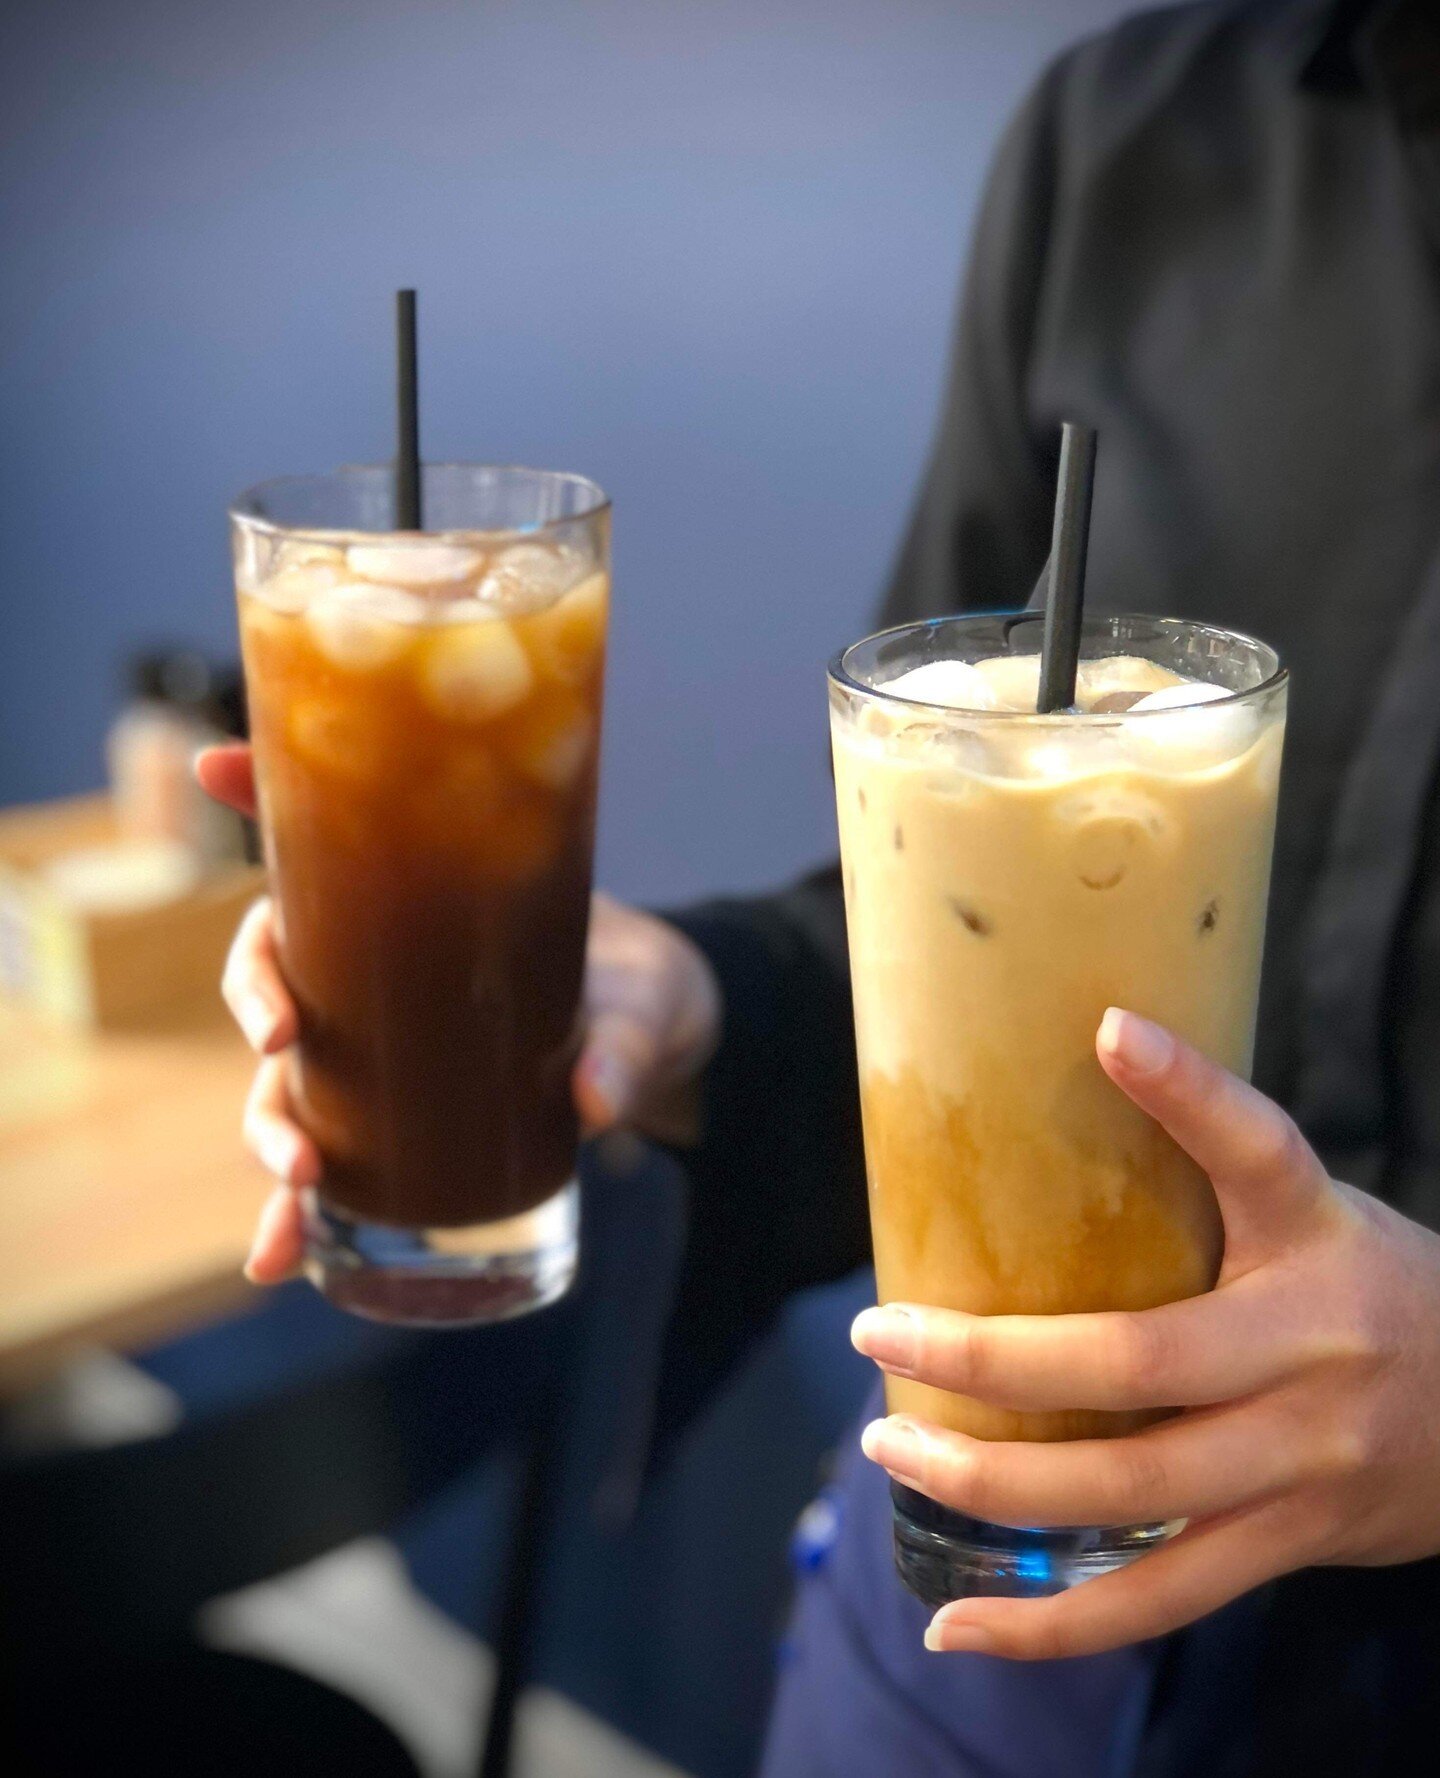 What&rsquo;s your favourite iced drink? ☀️⁠
⁠
⁠
⁠
⁠
⁠
#extractedivanhoe #coffee #ivanhoecafe #dineinivanhoe #melbournecafe #hungry #delicious​#breakfast #healthylifestyle #supportlocal #brunchinmelbourne #foodiegram #coffeeshop #melbourne #foodie #lu